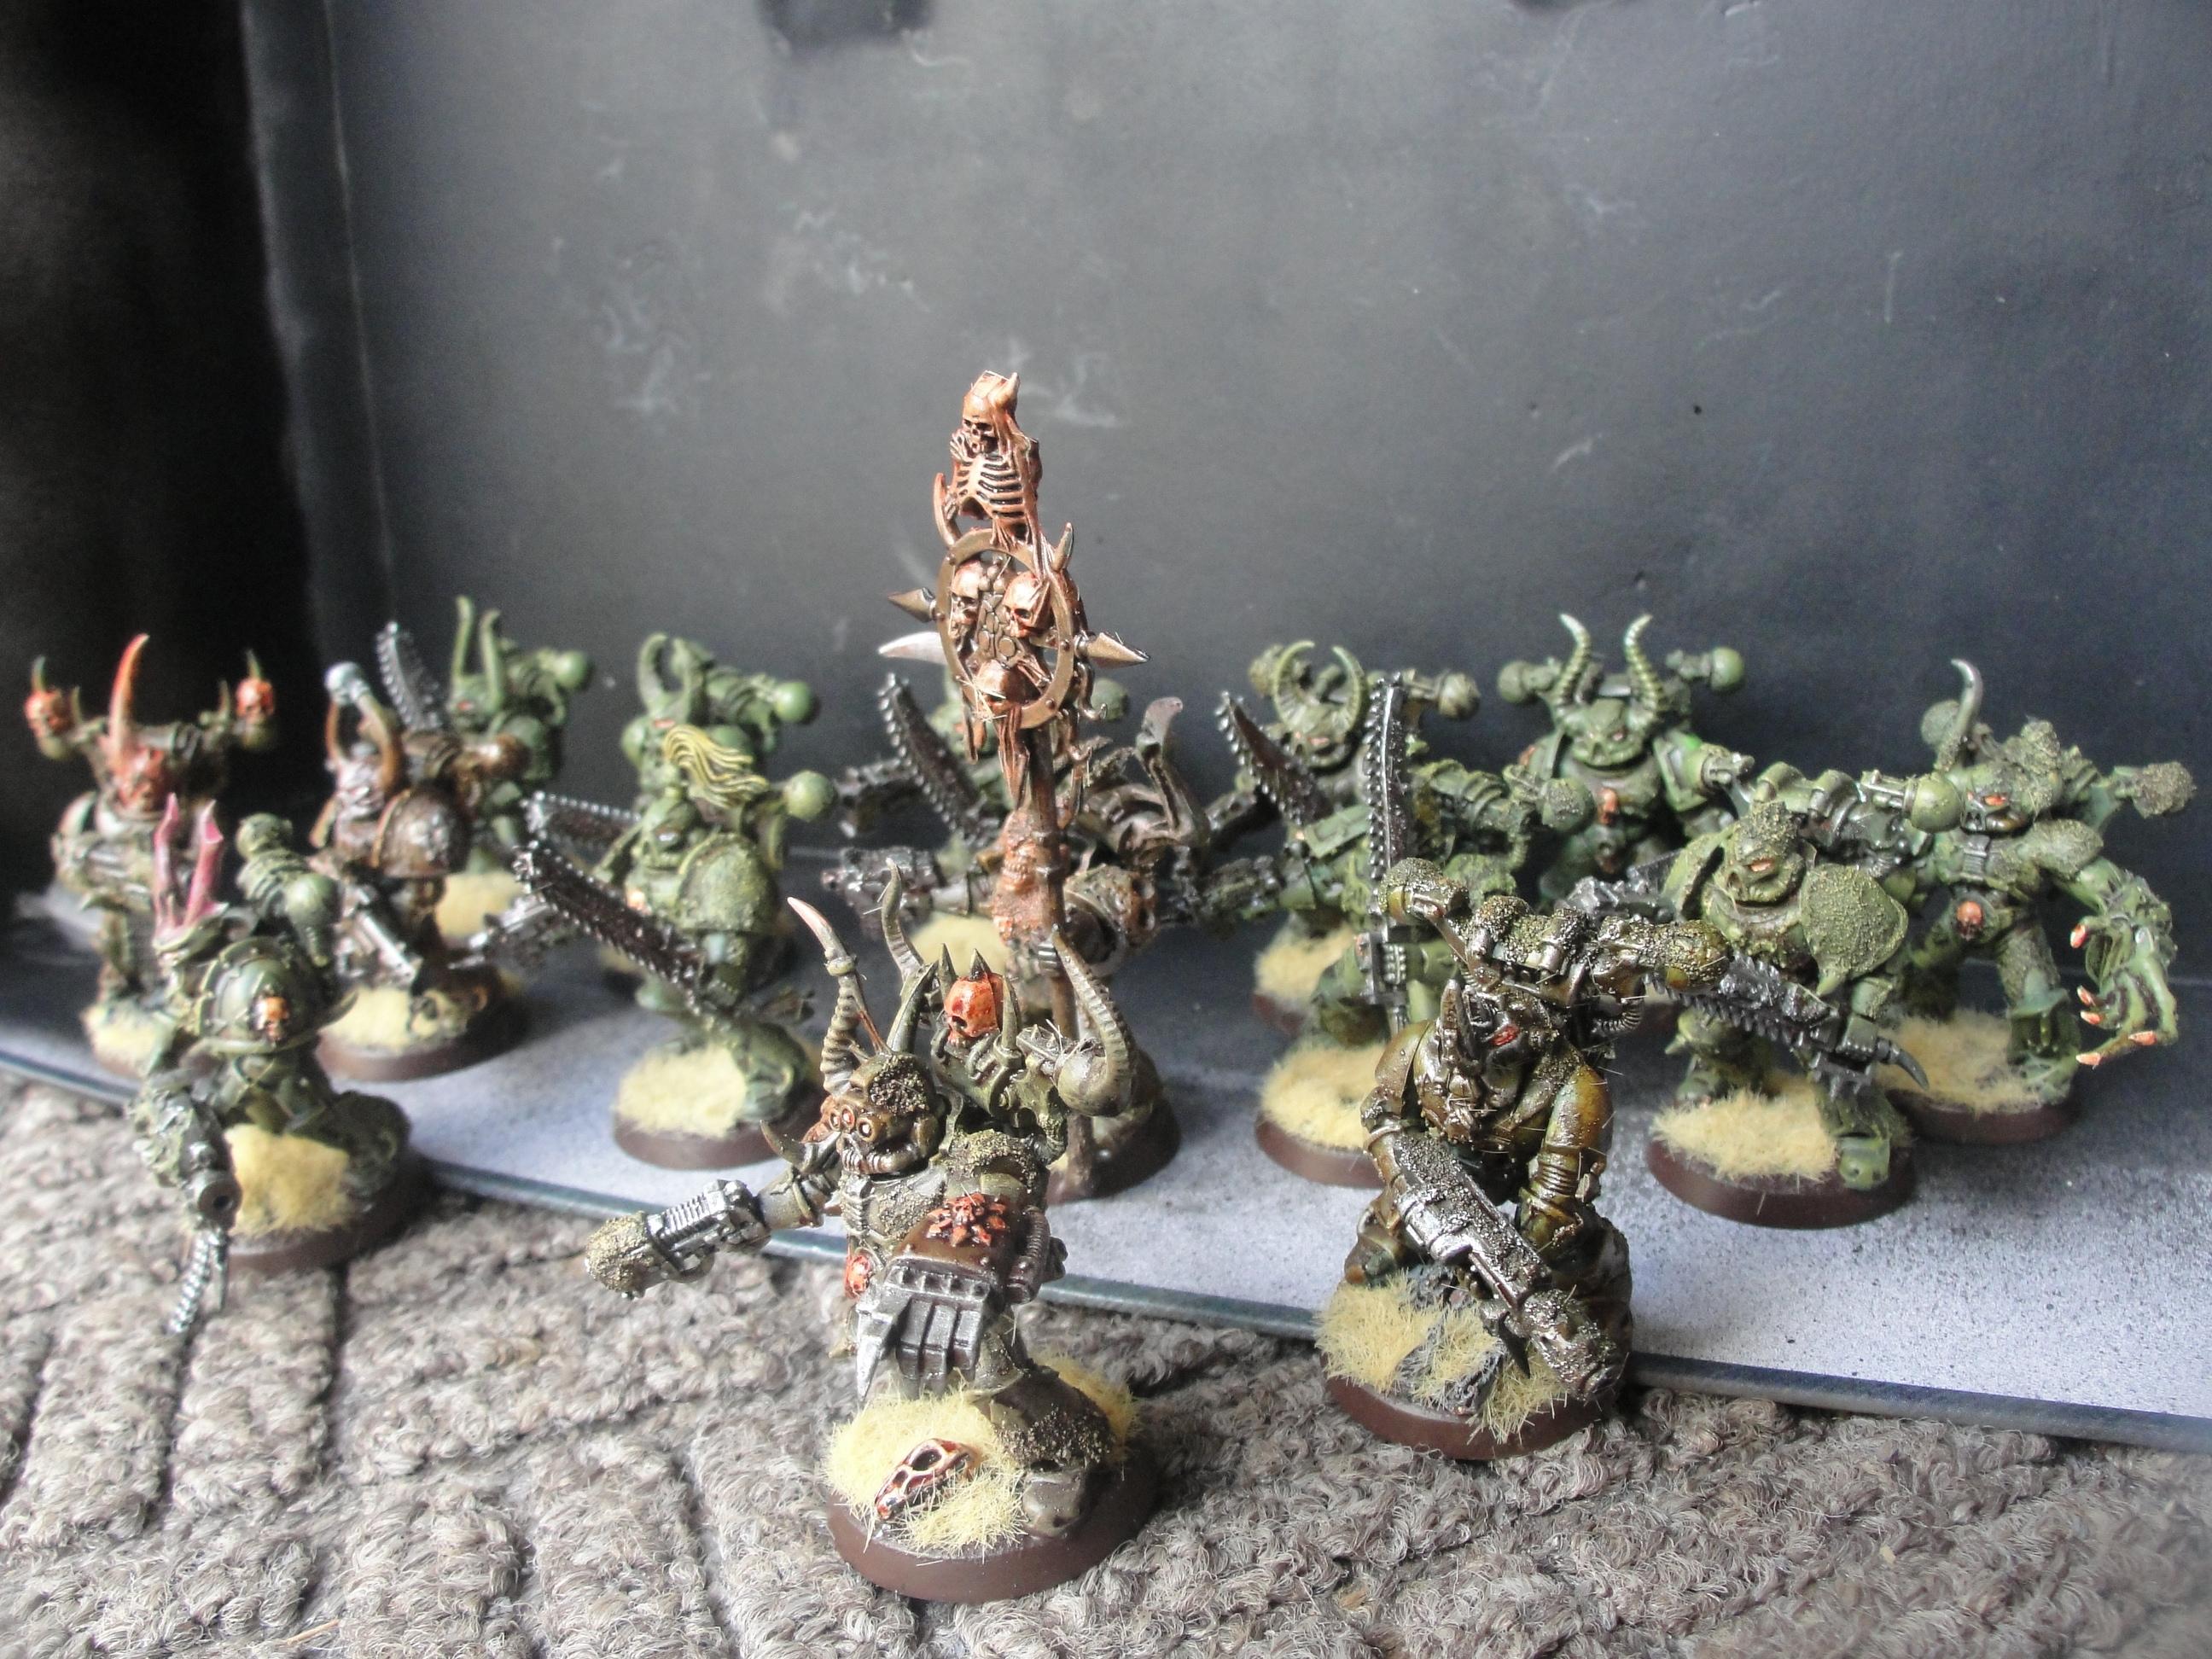 Chaos Space Marines, my team chaos space marines of Nurgle